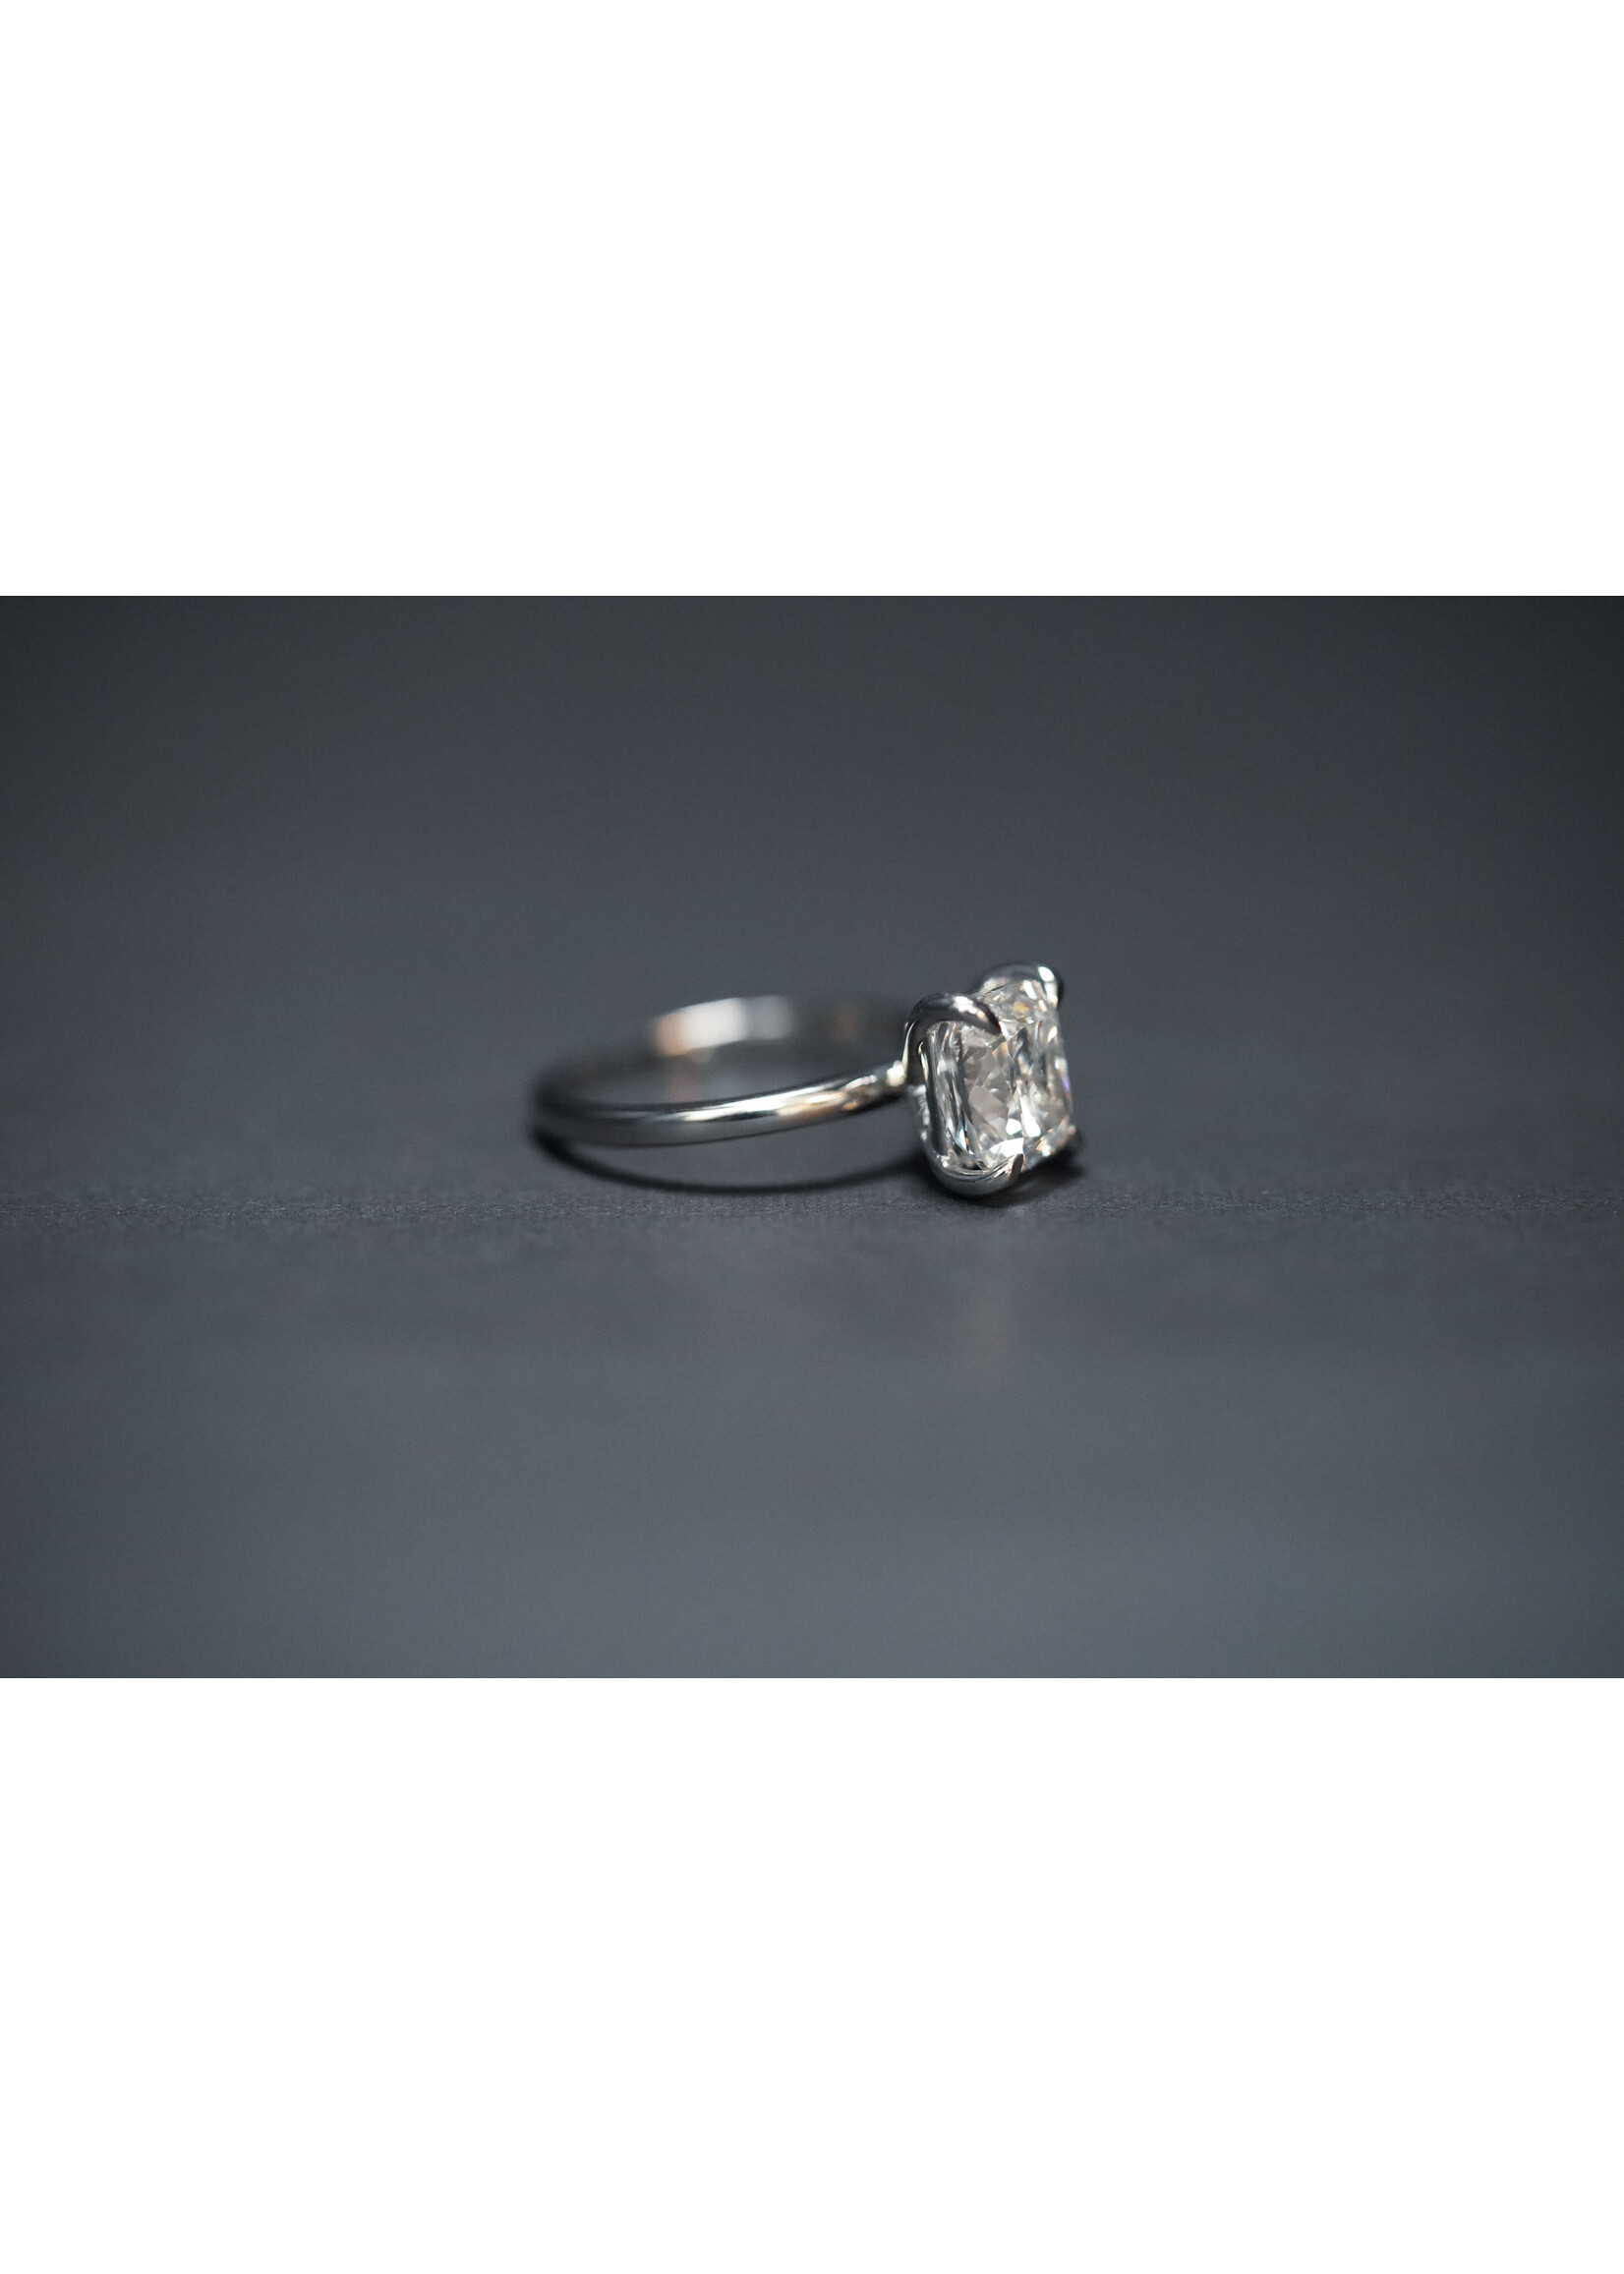 14KW 3.38g 3.02ct E/SI1 GIA Cushion Diamond Solitaire Engagement Ring (size 7)